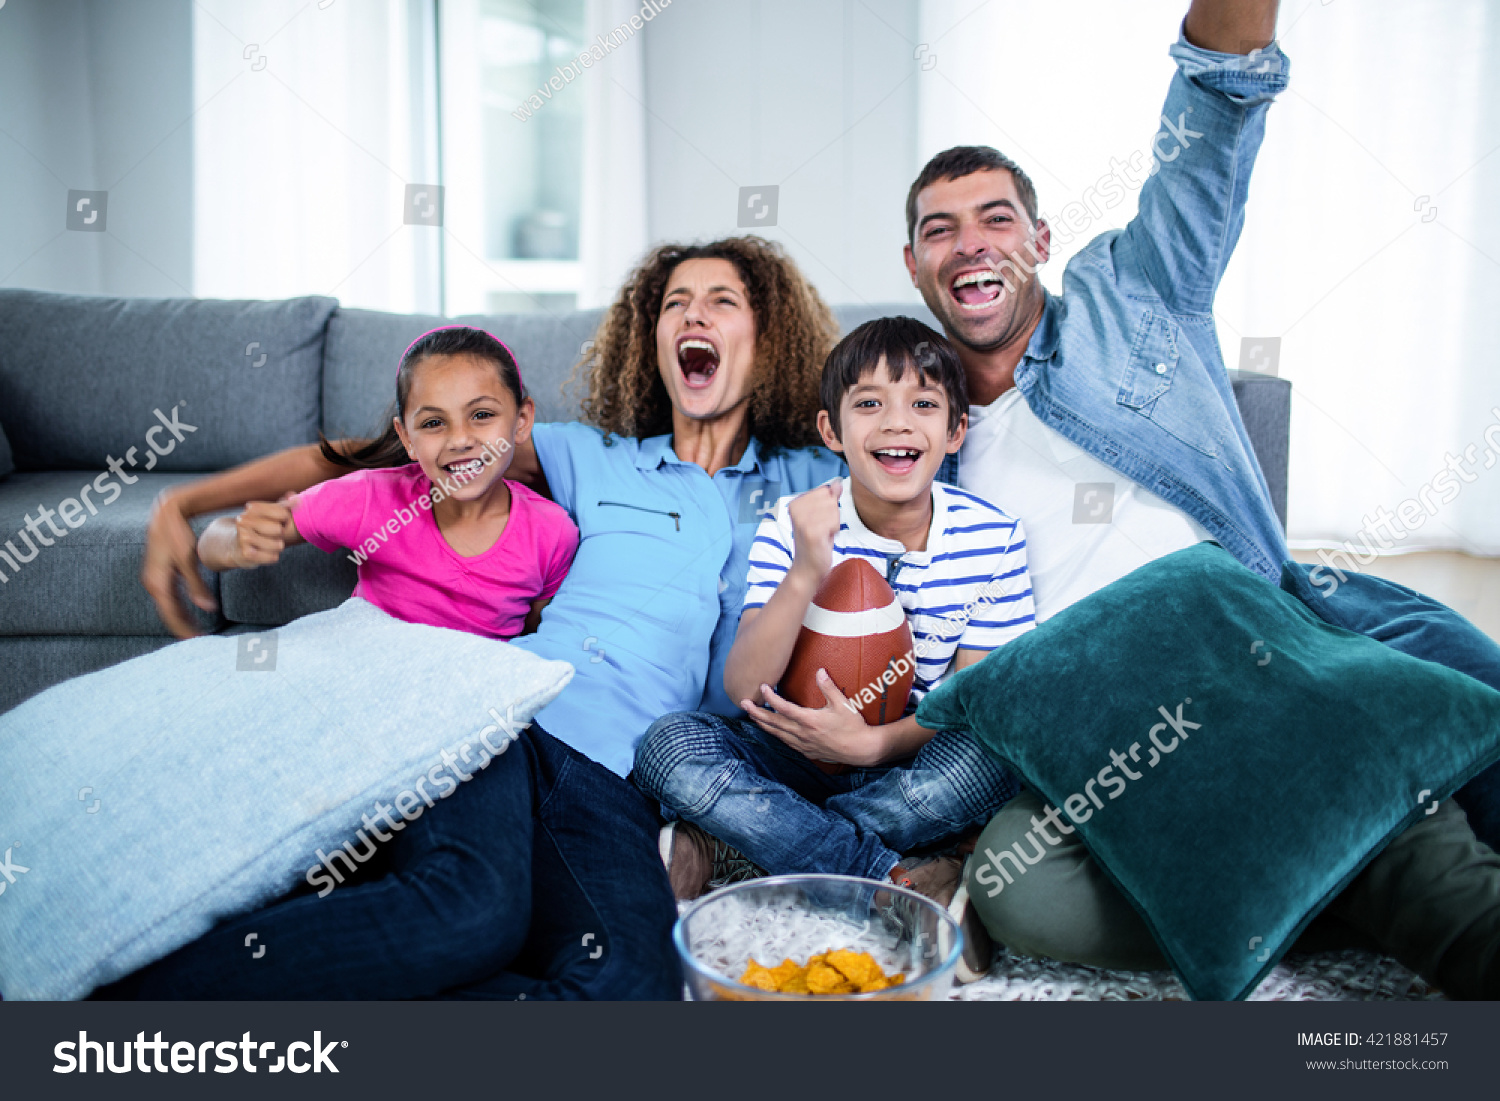 Family watching american football match on television at home #421881457